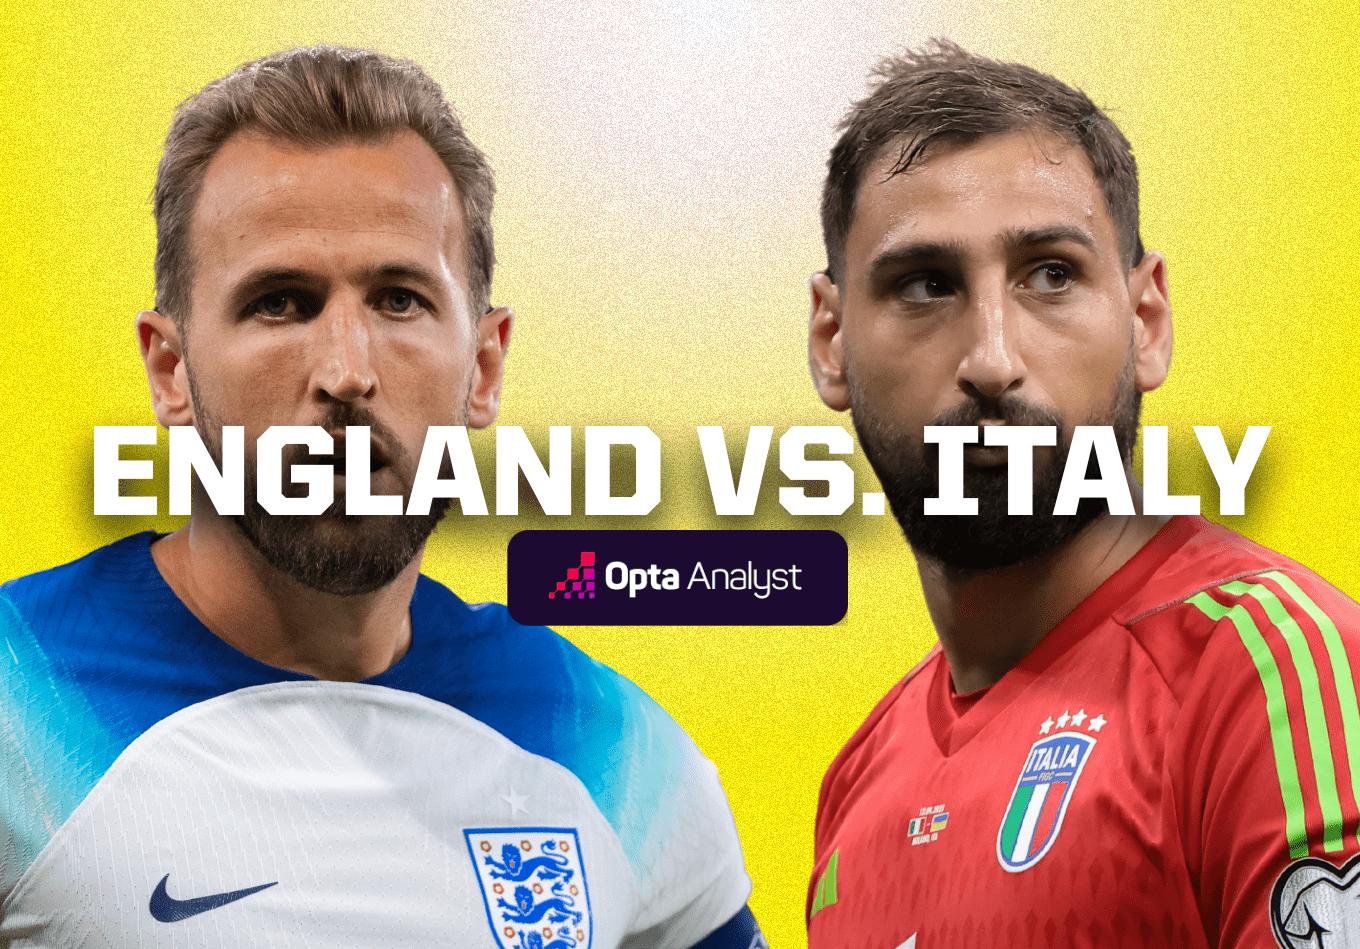 England vs Italy: Prediction and Preview